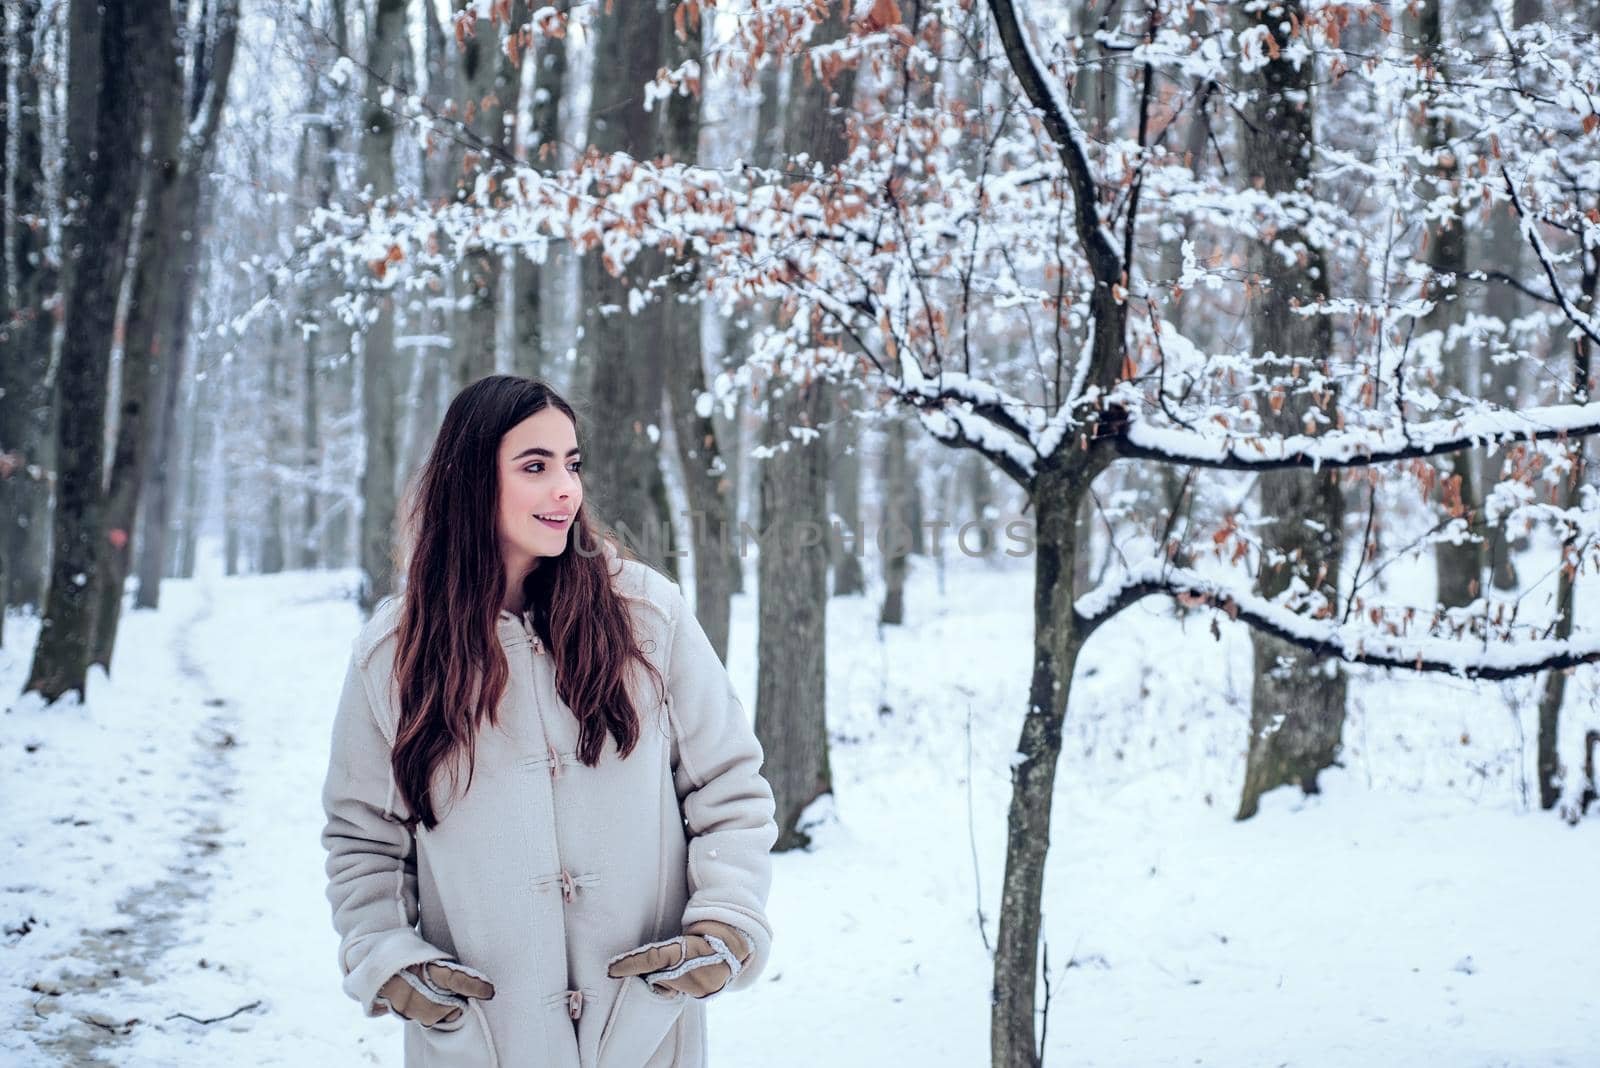 Winter woman. Portrait of a young woman in snow trying to warm herself. Beautiful girl in the winter forest in white down jacket